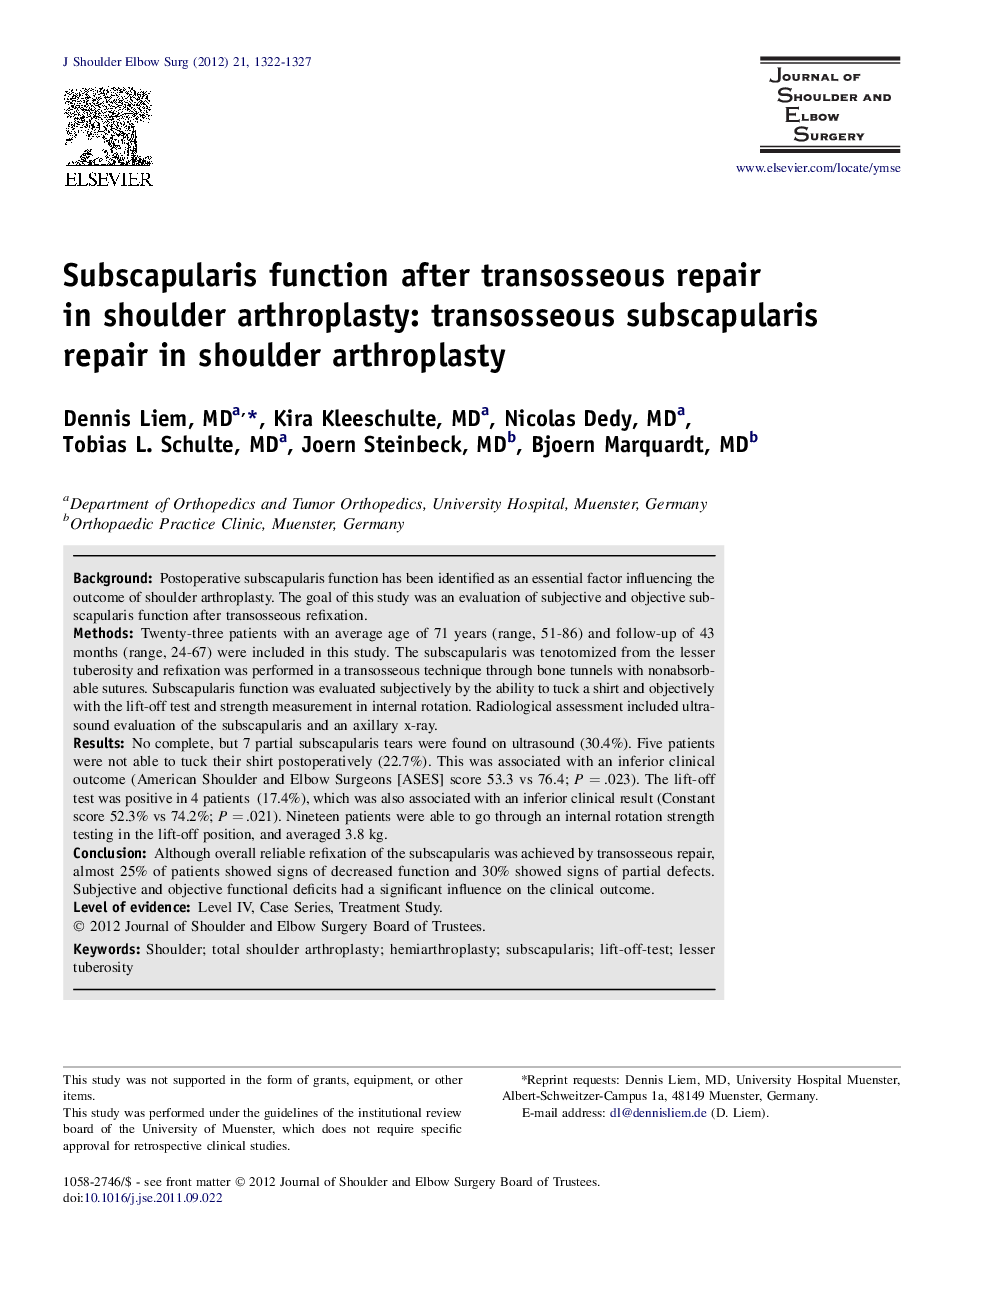 Subscapularis function after transosseous repair in shoulder arthroplasty: transosseous subscapularis repair in shoulder arthroplasty 